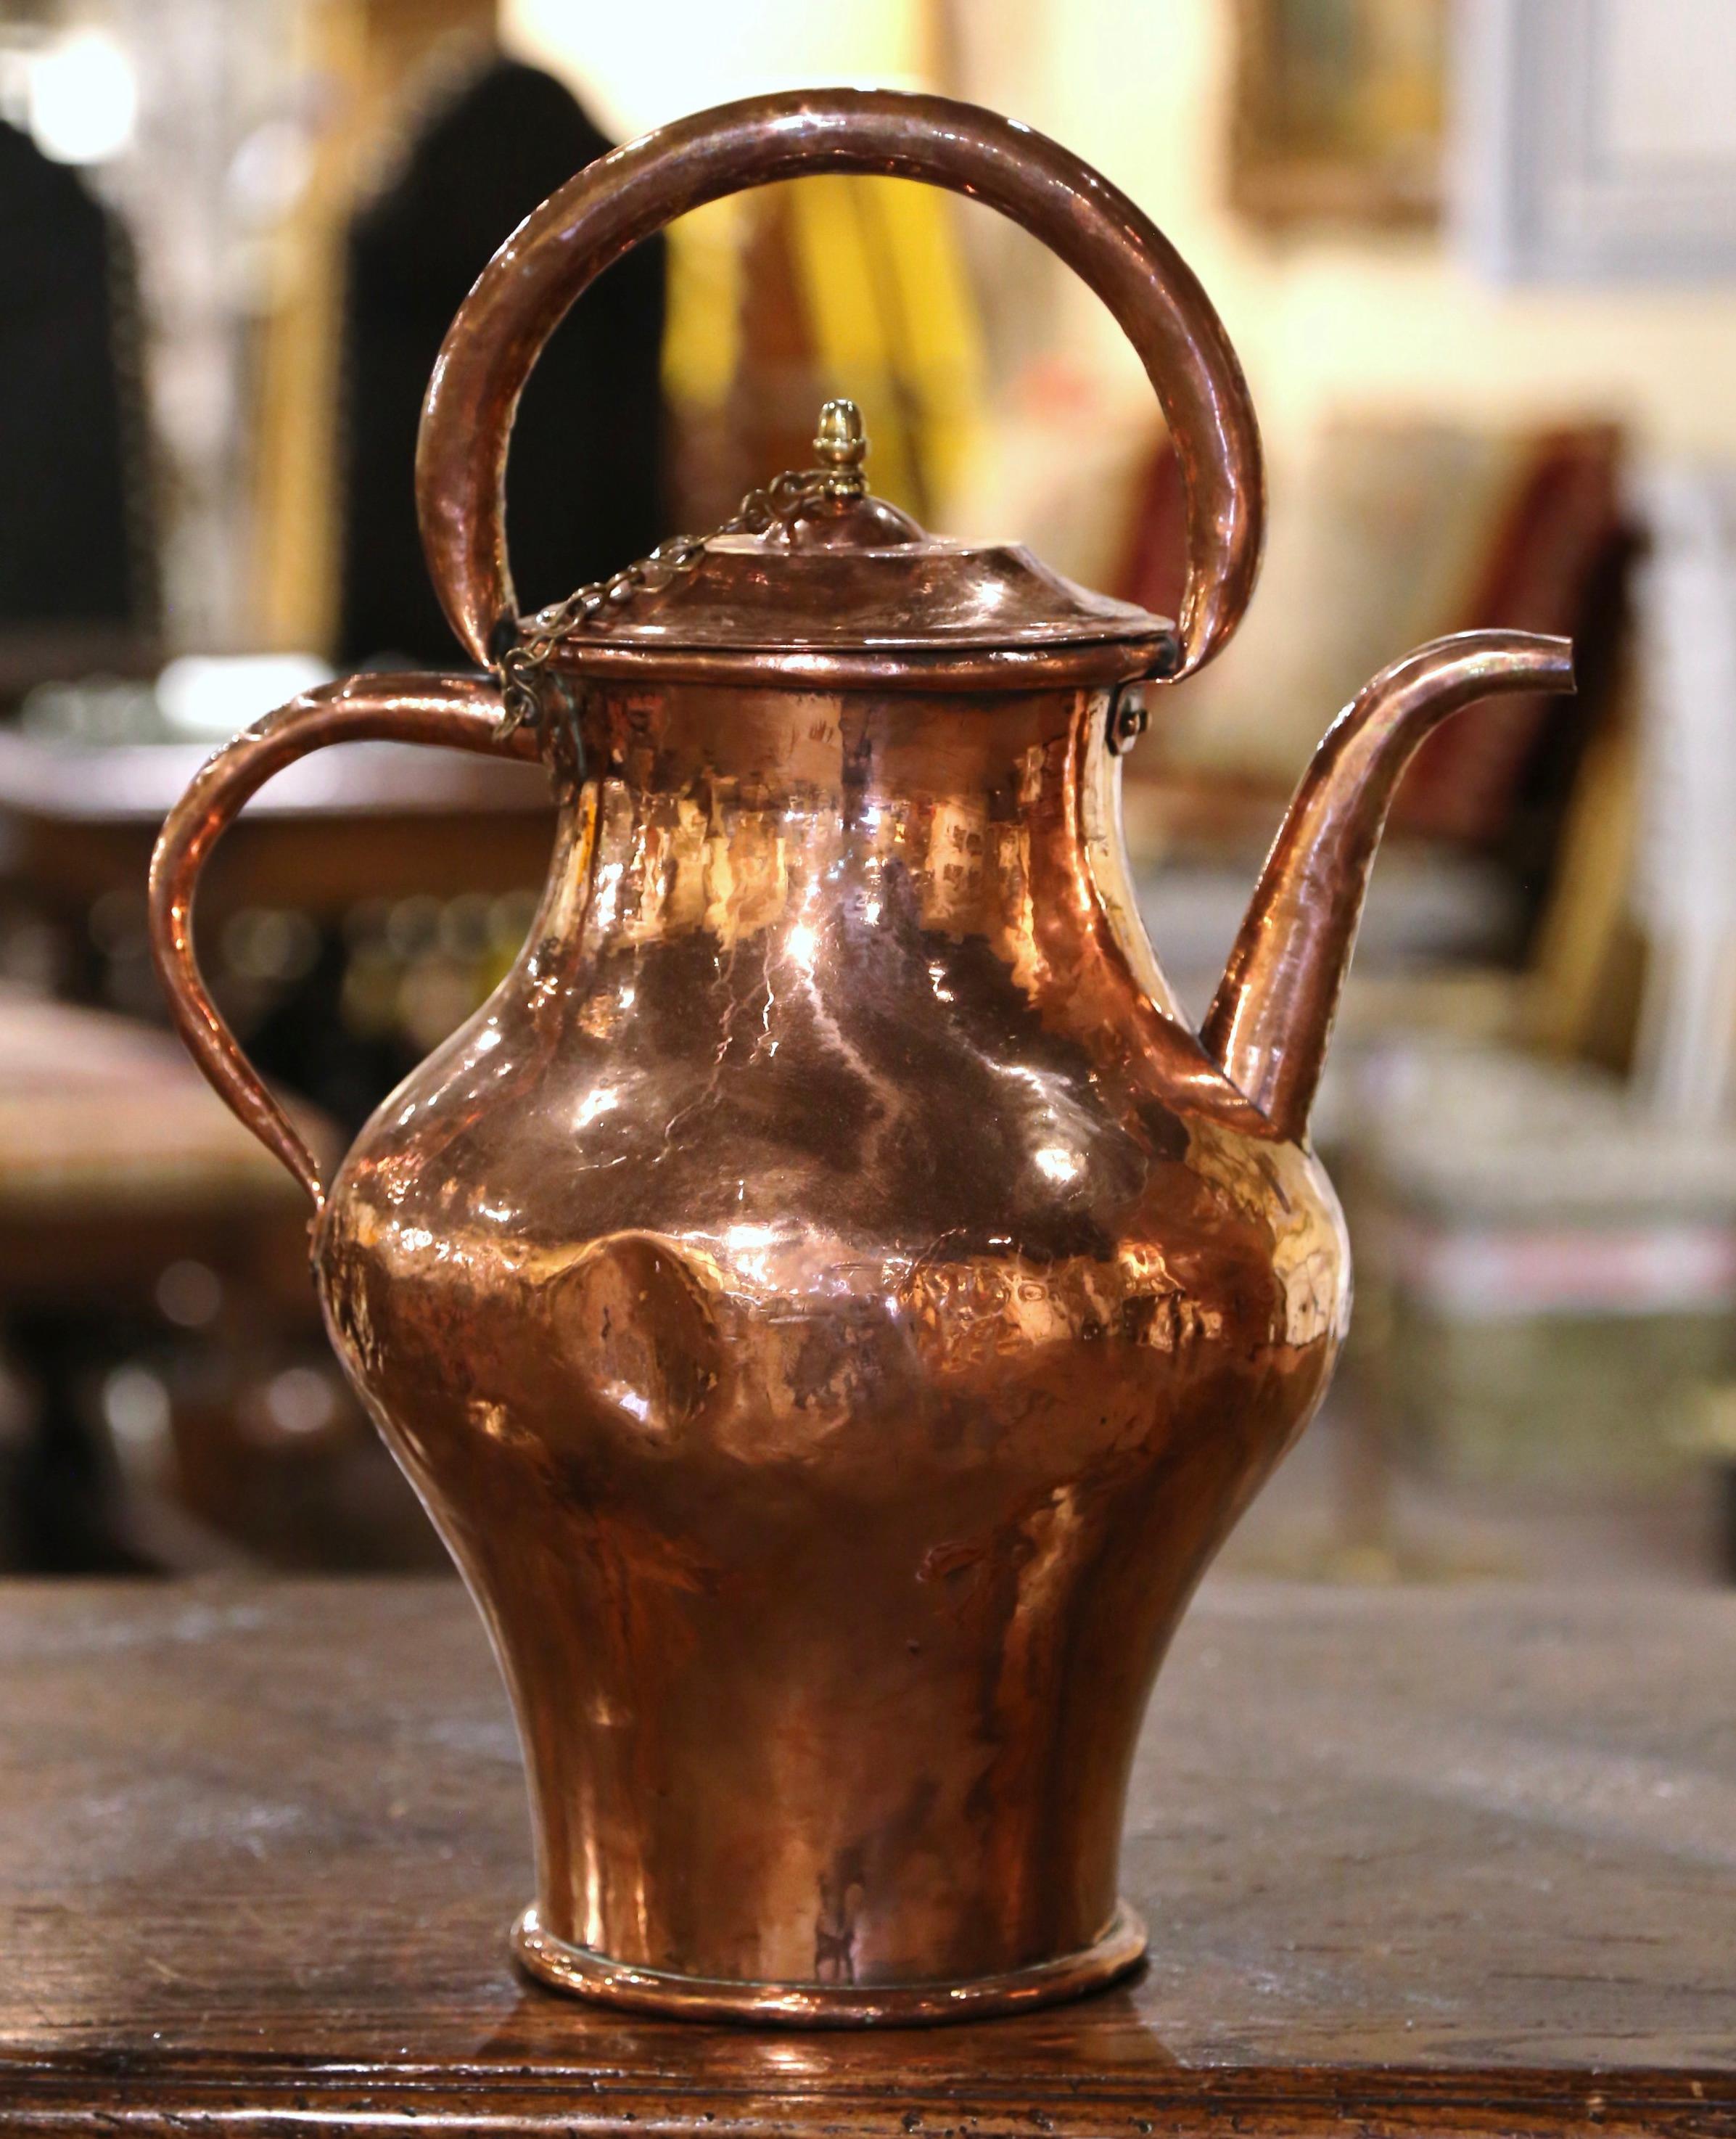 Bring an authentic French countryside touch to your kitchen with this tall antique copper hot water kettle. Crafted in Normandy, France, circa 1770, the decorative pitcher is round in shape and dressed with double handles attached with rivets; it is